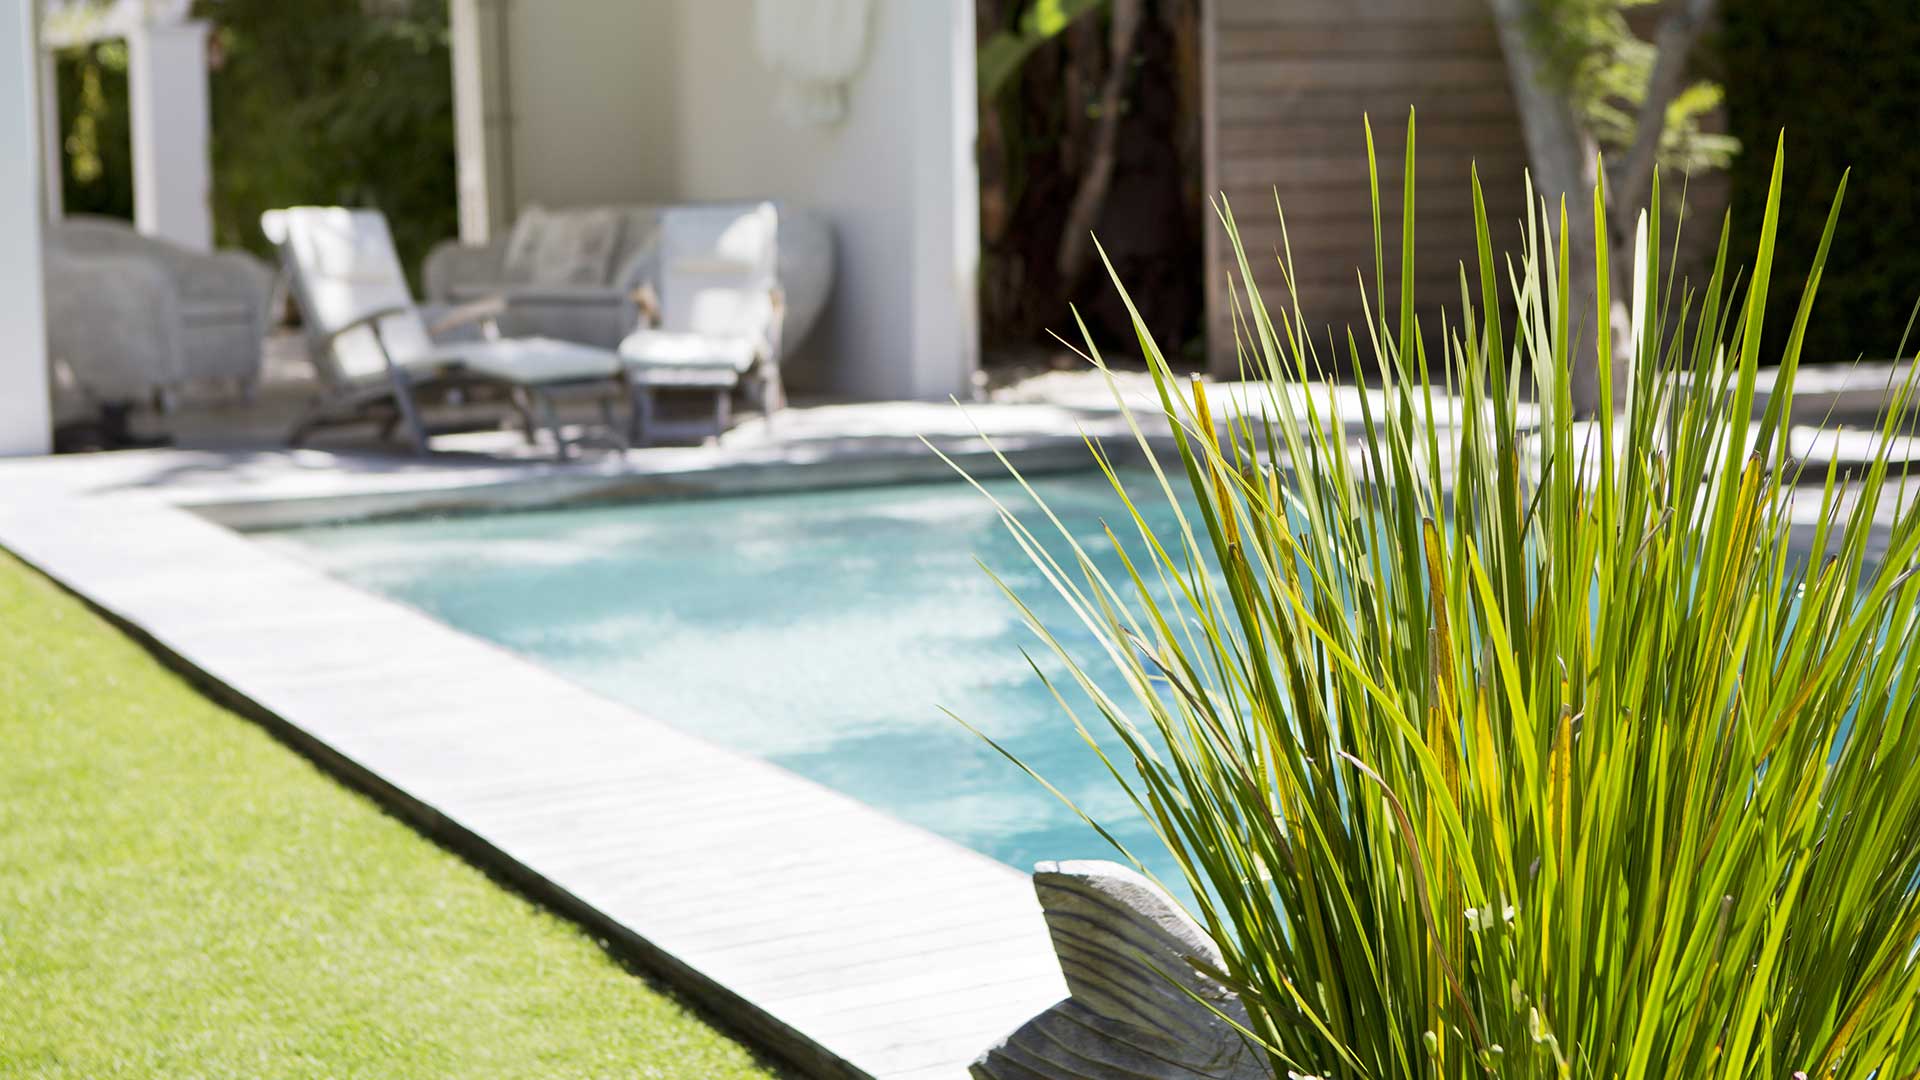 5 Pool Landscaping Ideas On A Budget, Landscaping Ideas Around Pool